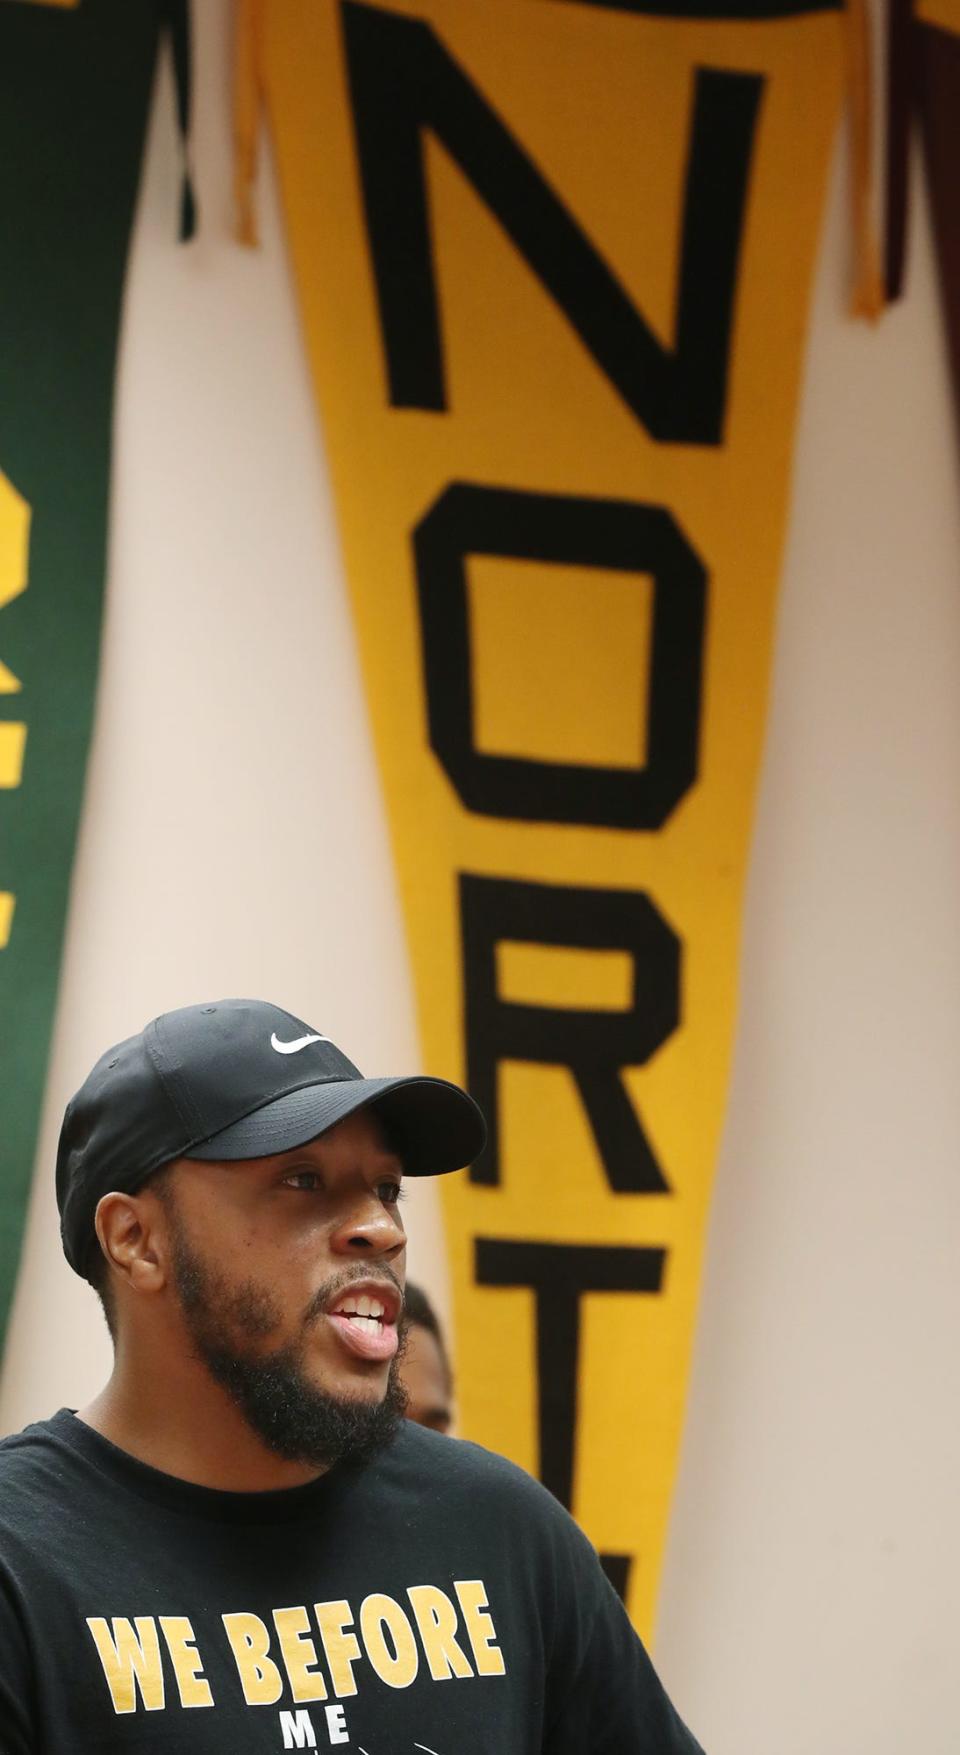 North coach DeMonte Powell talks about his team and competing during the City Series football luncheon July 27 at the Akron Education Association in Akron.